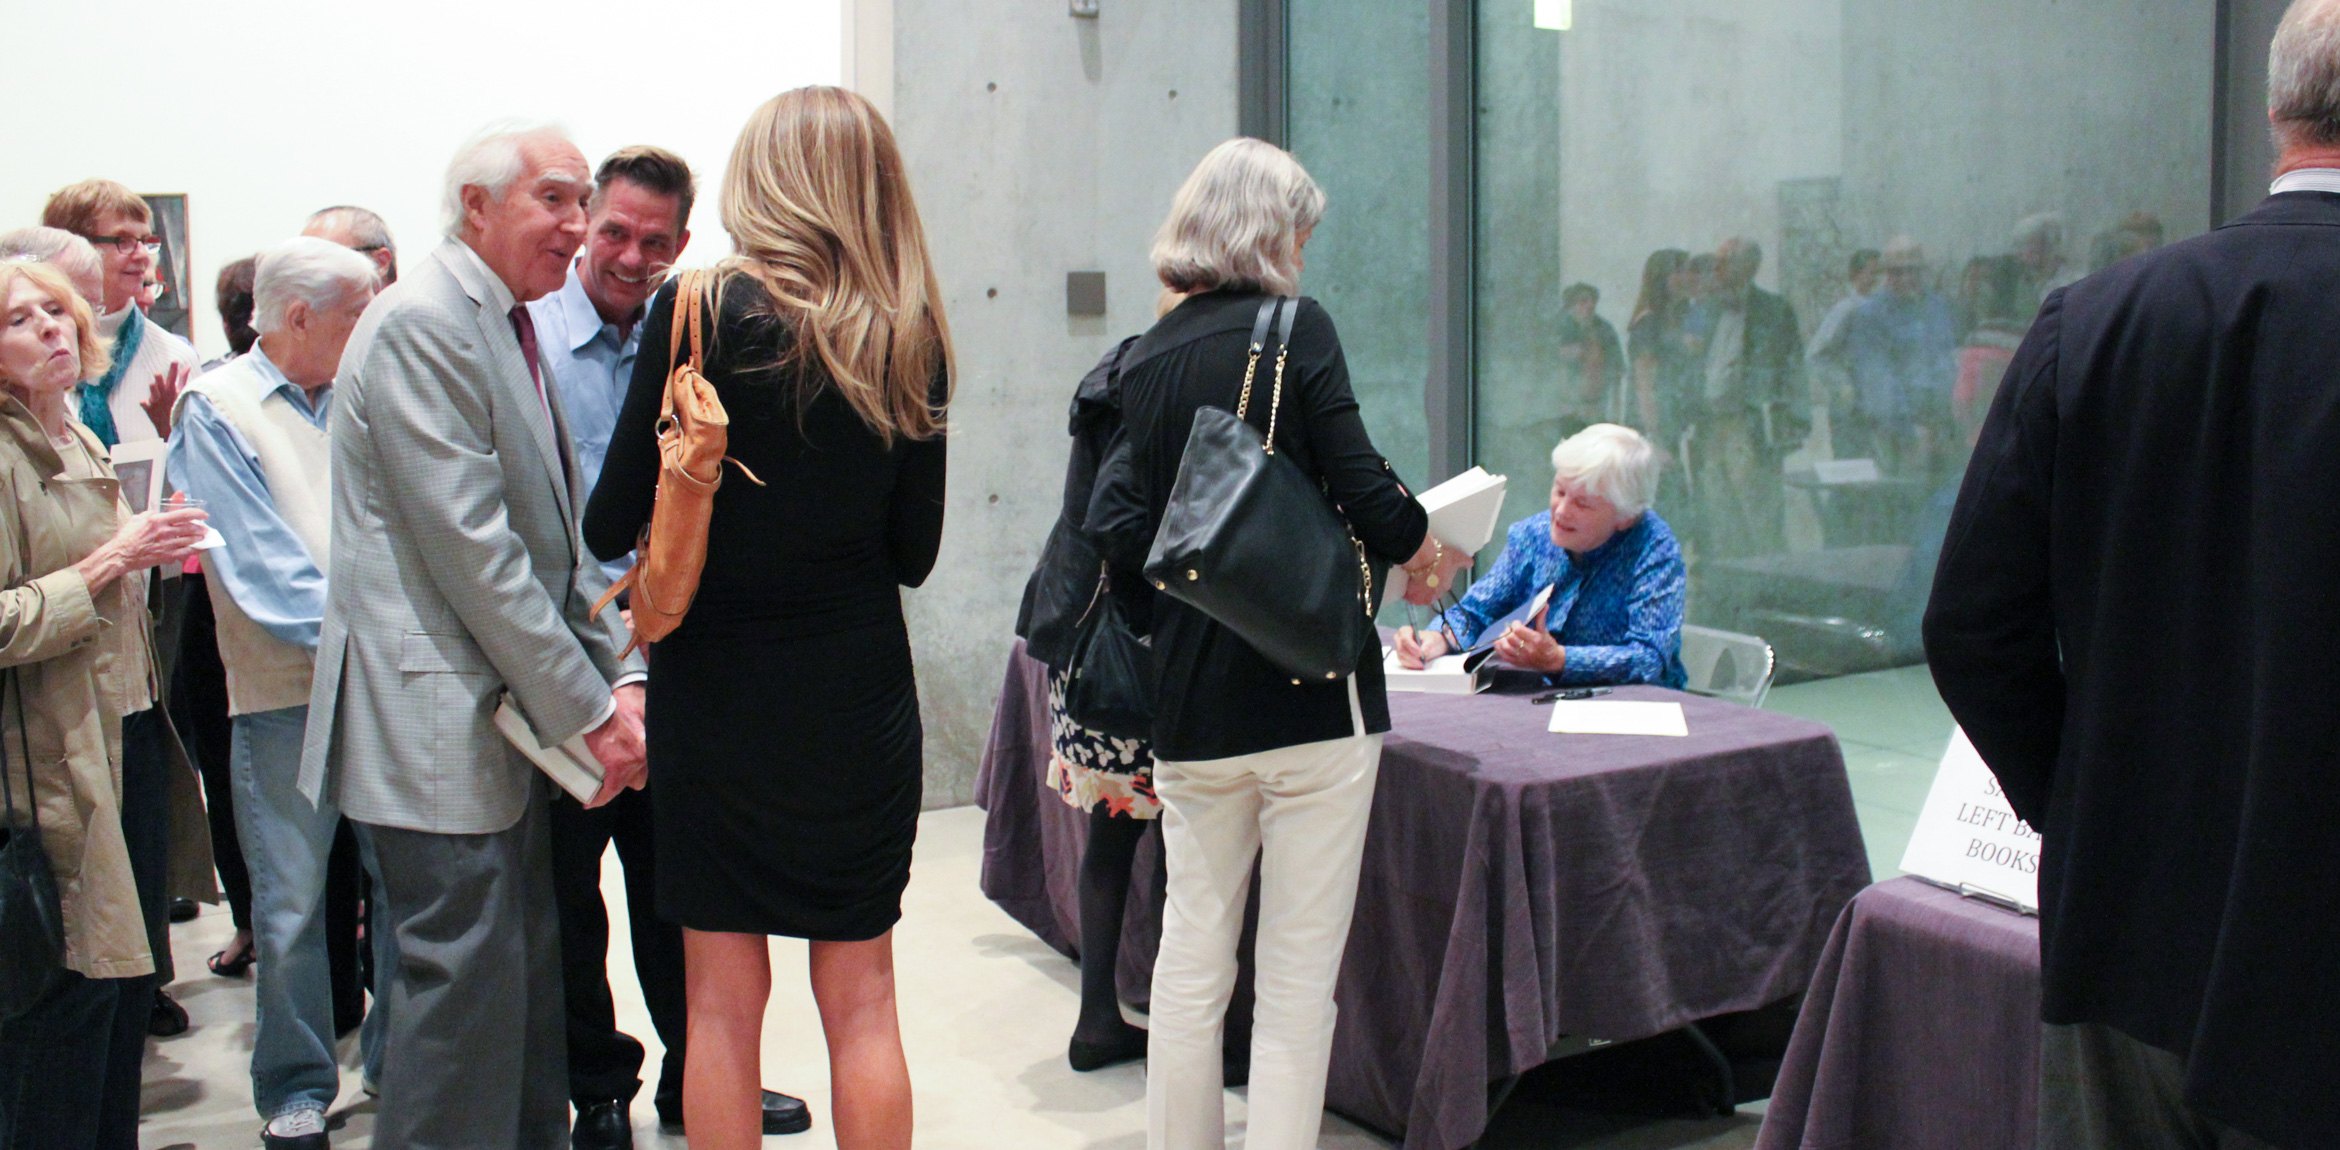 Marjorie B. Cohn chats with community members and signs their books at a table in front of the Water Court windows. Others gather to wait their turn to speak with her.